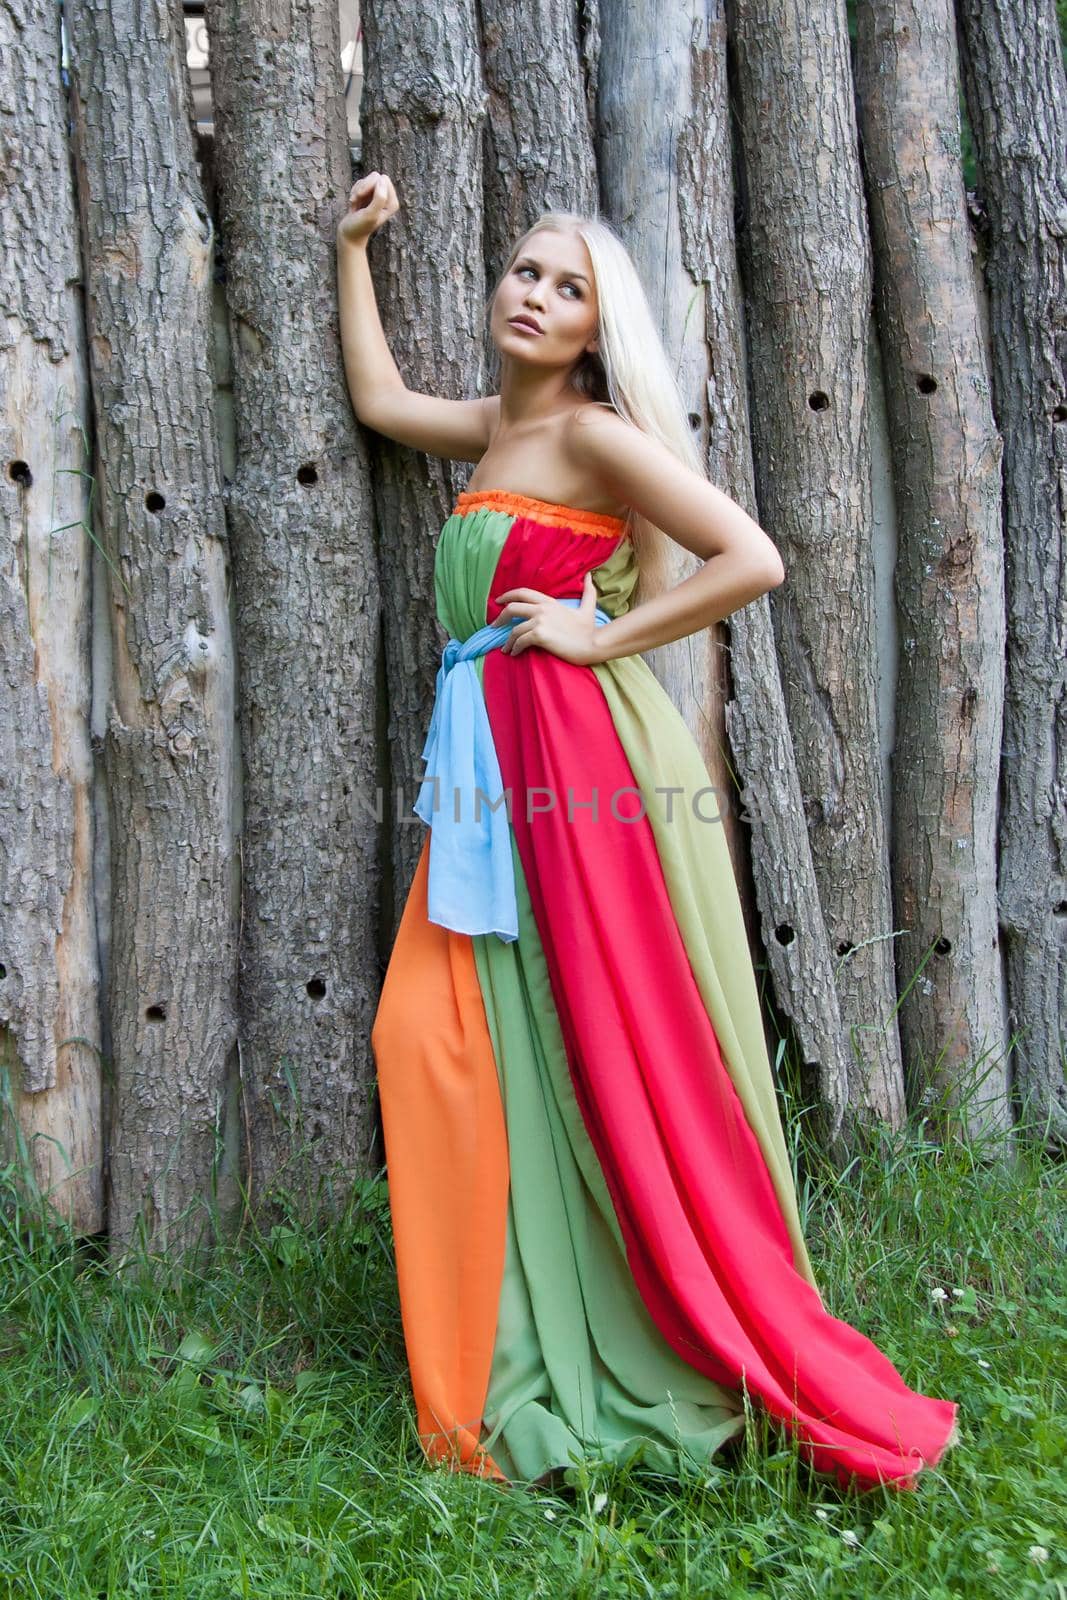 Sexy woman outdoor with nice colorful dress